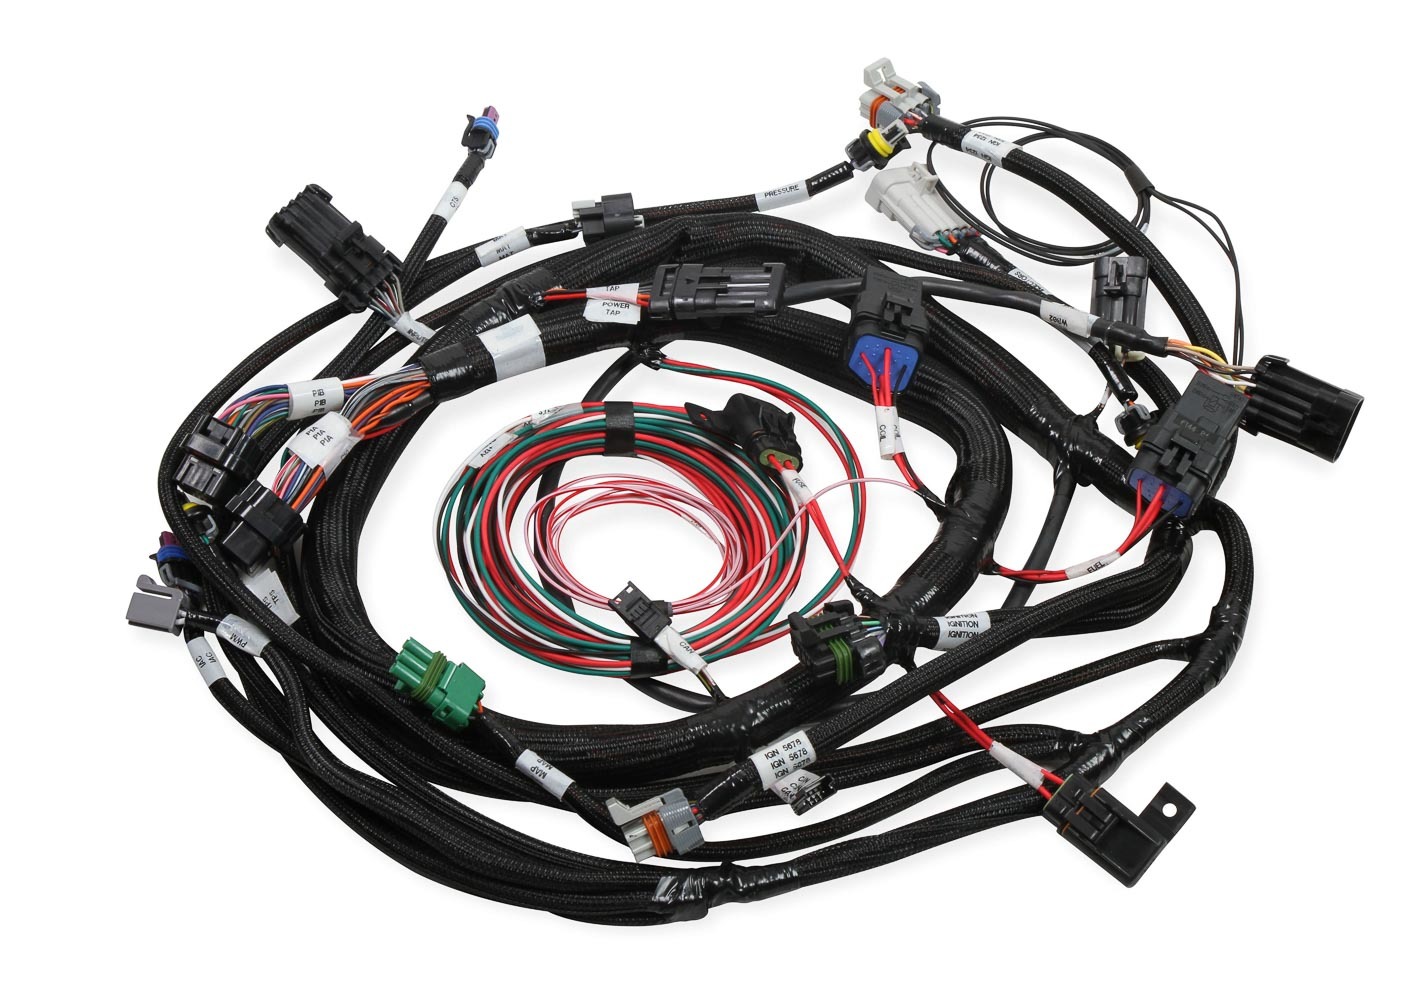 Holley 558-118 Ignition Wiring Harness, Coil-On-Plug Main Harness, Ford MPFI, Each